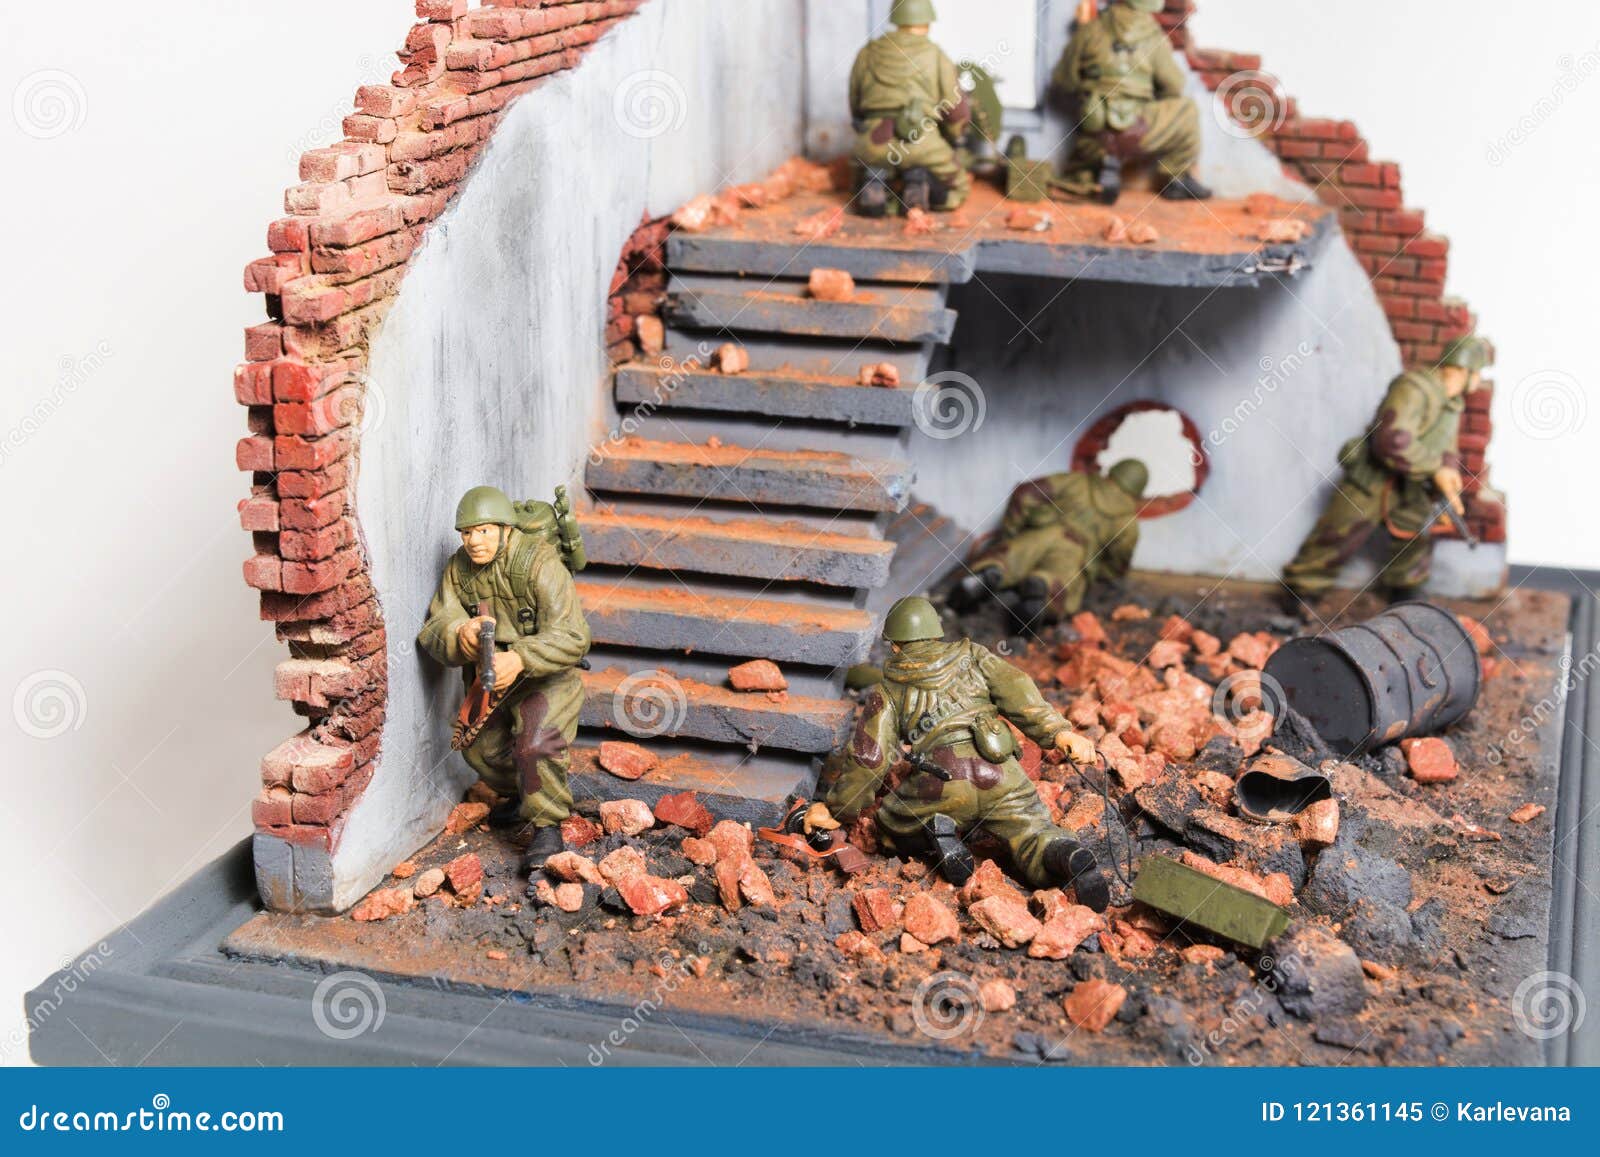 Part of Diorama with Six Soldiers Stock Image - Image of attack